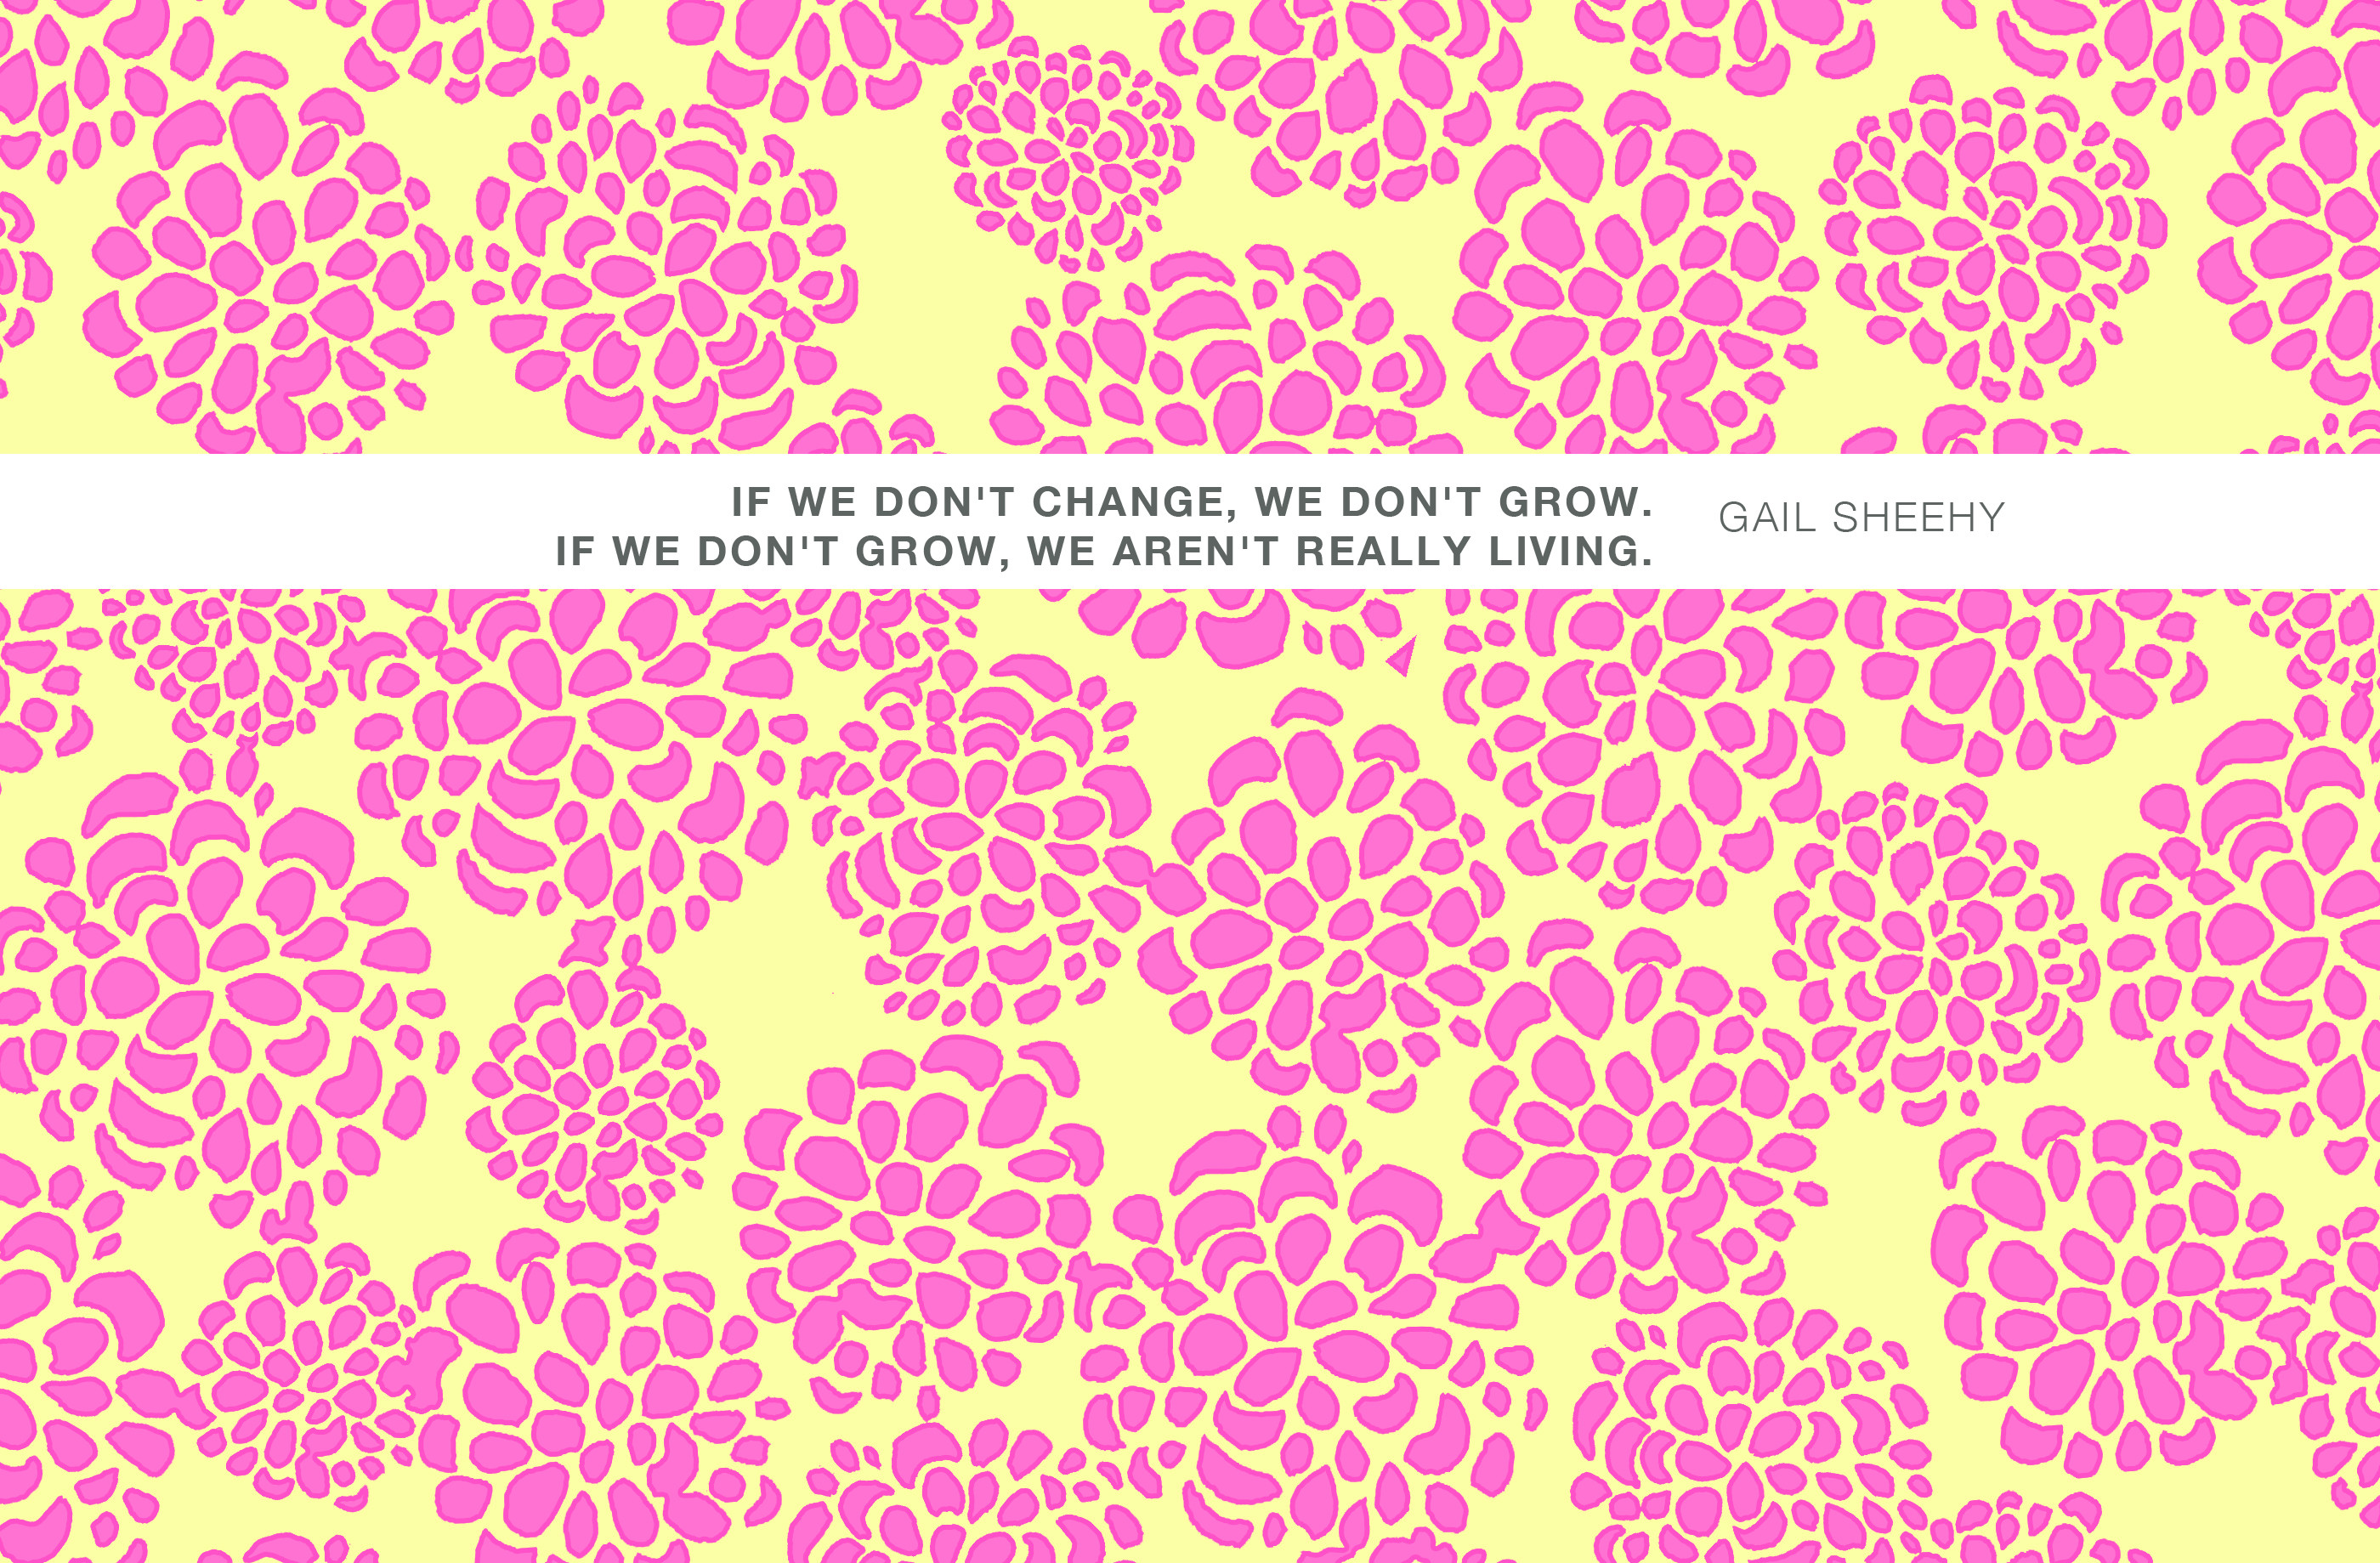 2800x1839 Pretty peach desktop / Computer Wallpaper background with a positive  motivational quote. | Desktop + iPhone Wallpapers | Pinterest | Positive  motivational ...